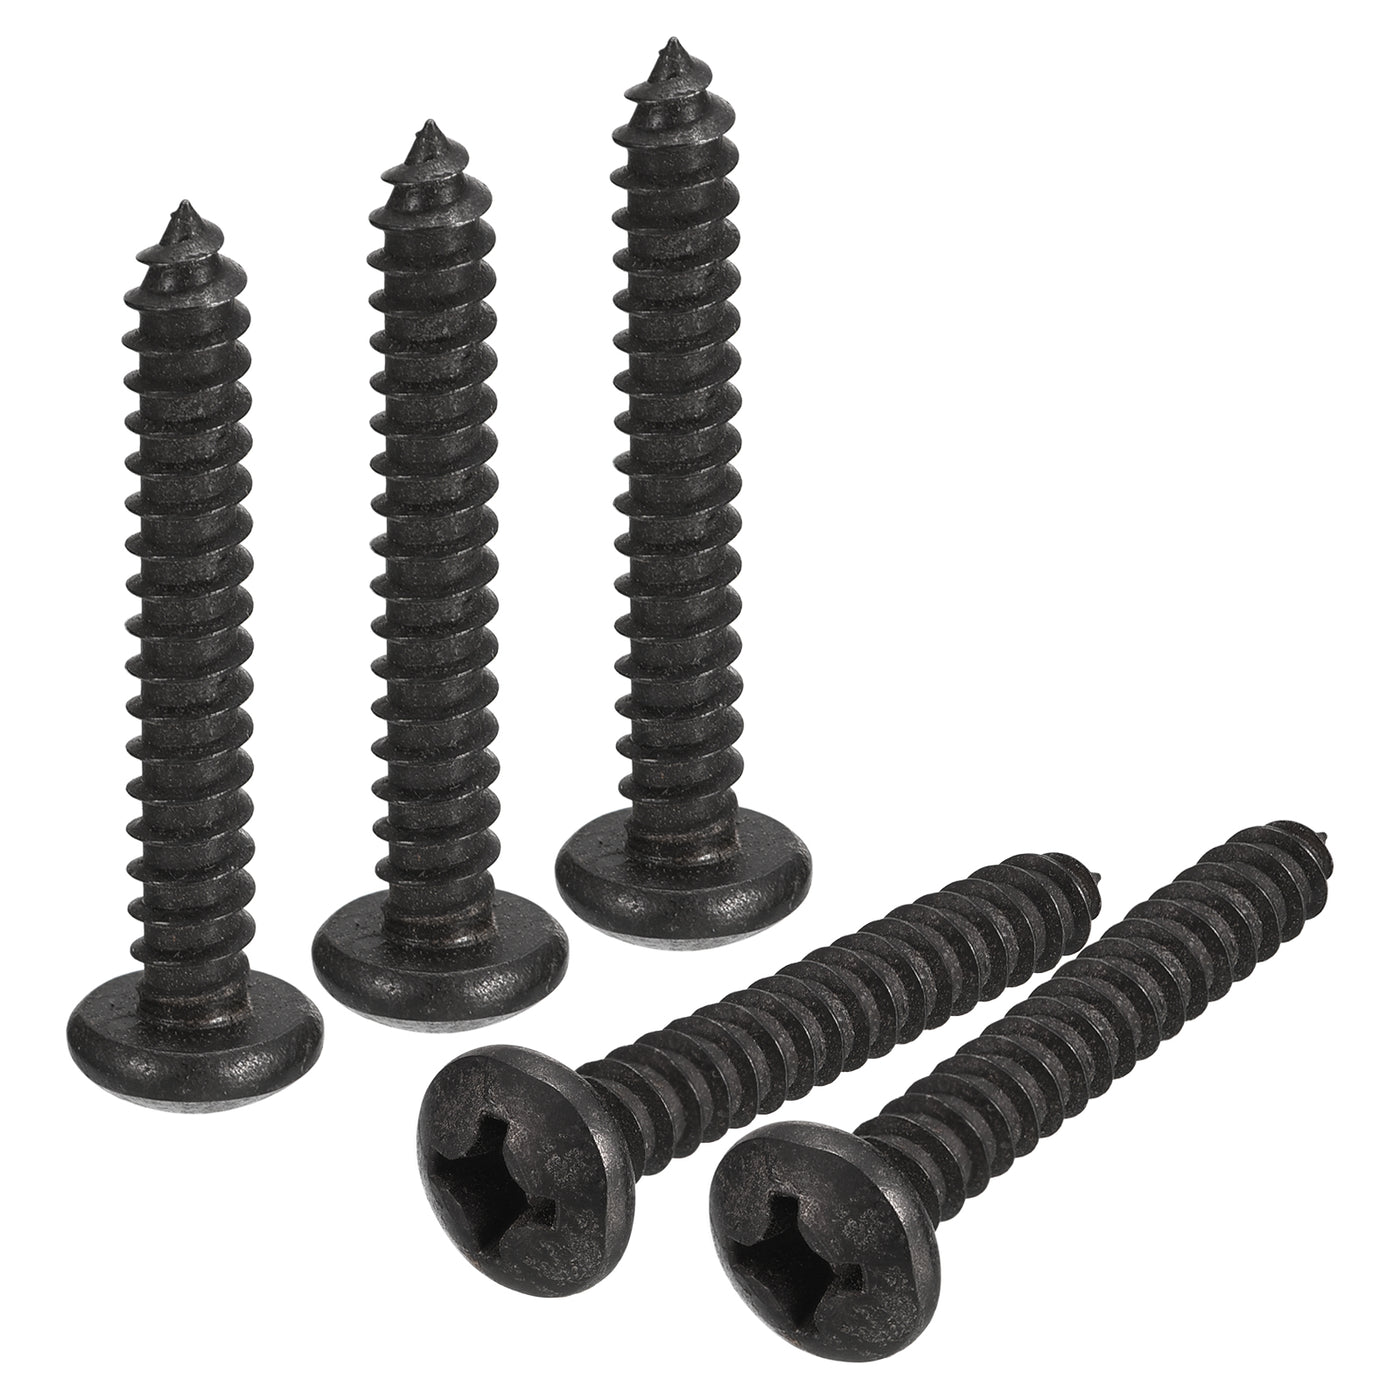 uxcell Uxcell 1/4 x 1-3/8" Phillips Pan Head Self-tapping Screw, 25pcs - 304 Stainless Steel Round Head Wood Screw Full Thread (Black)